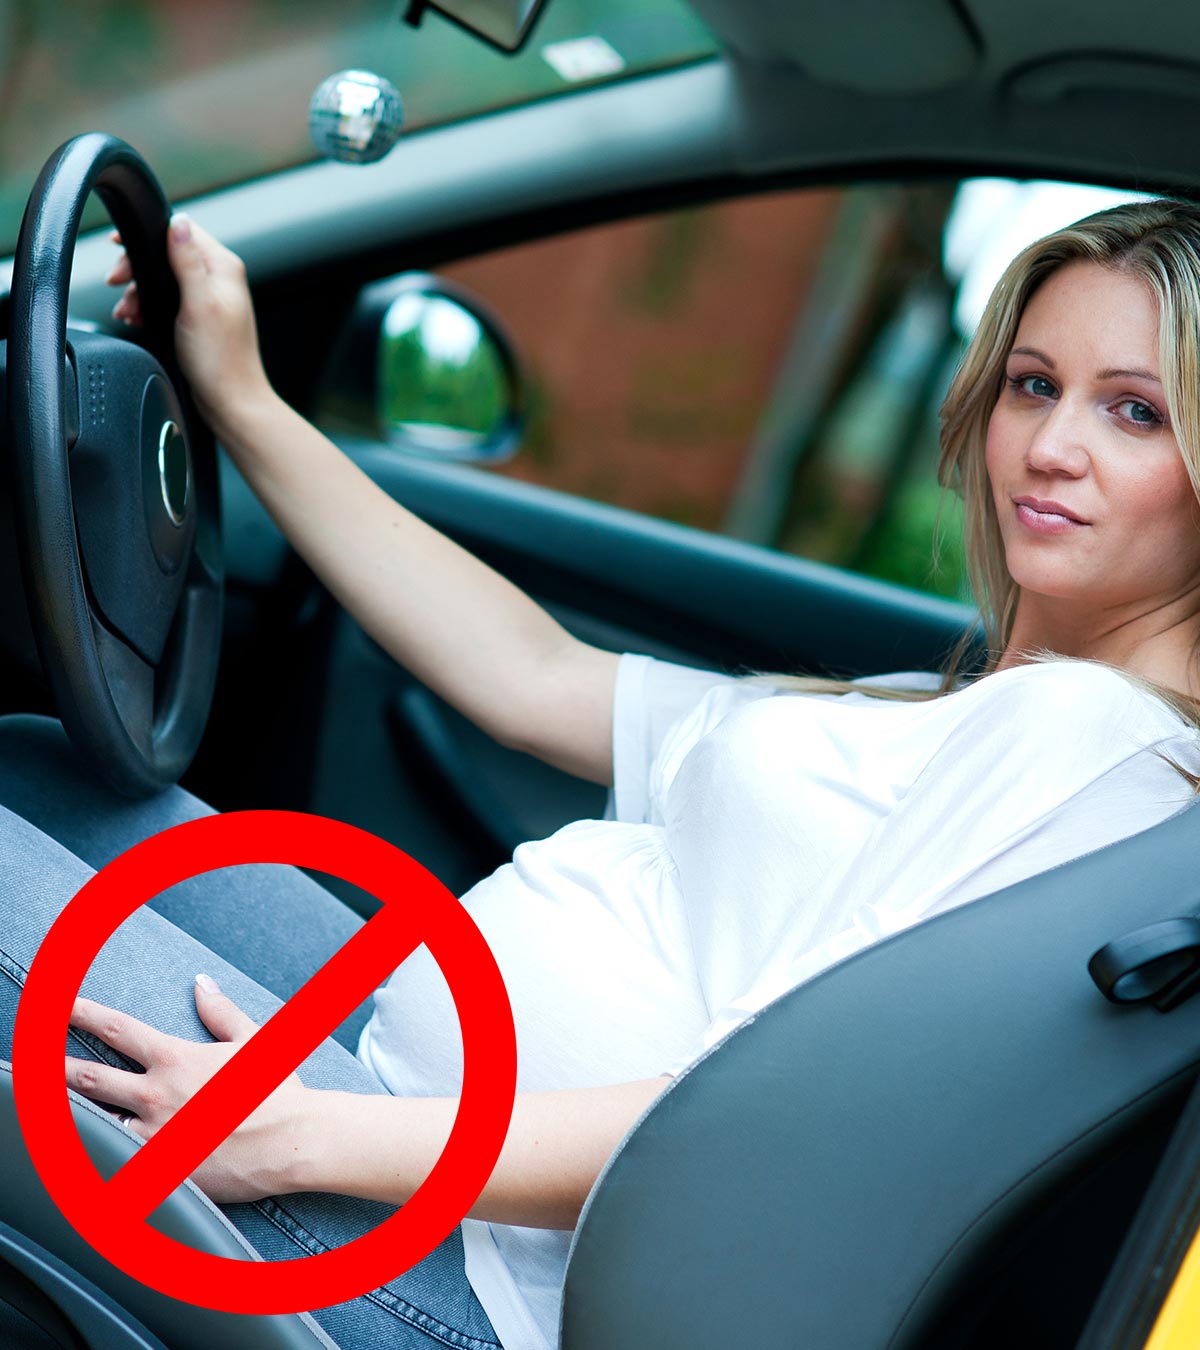 Is It Safe To Travel By Car During Pregnancy?